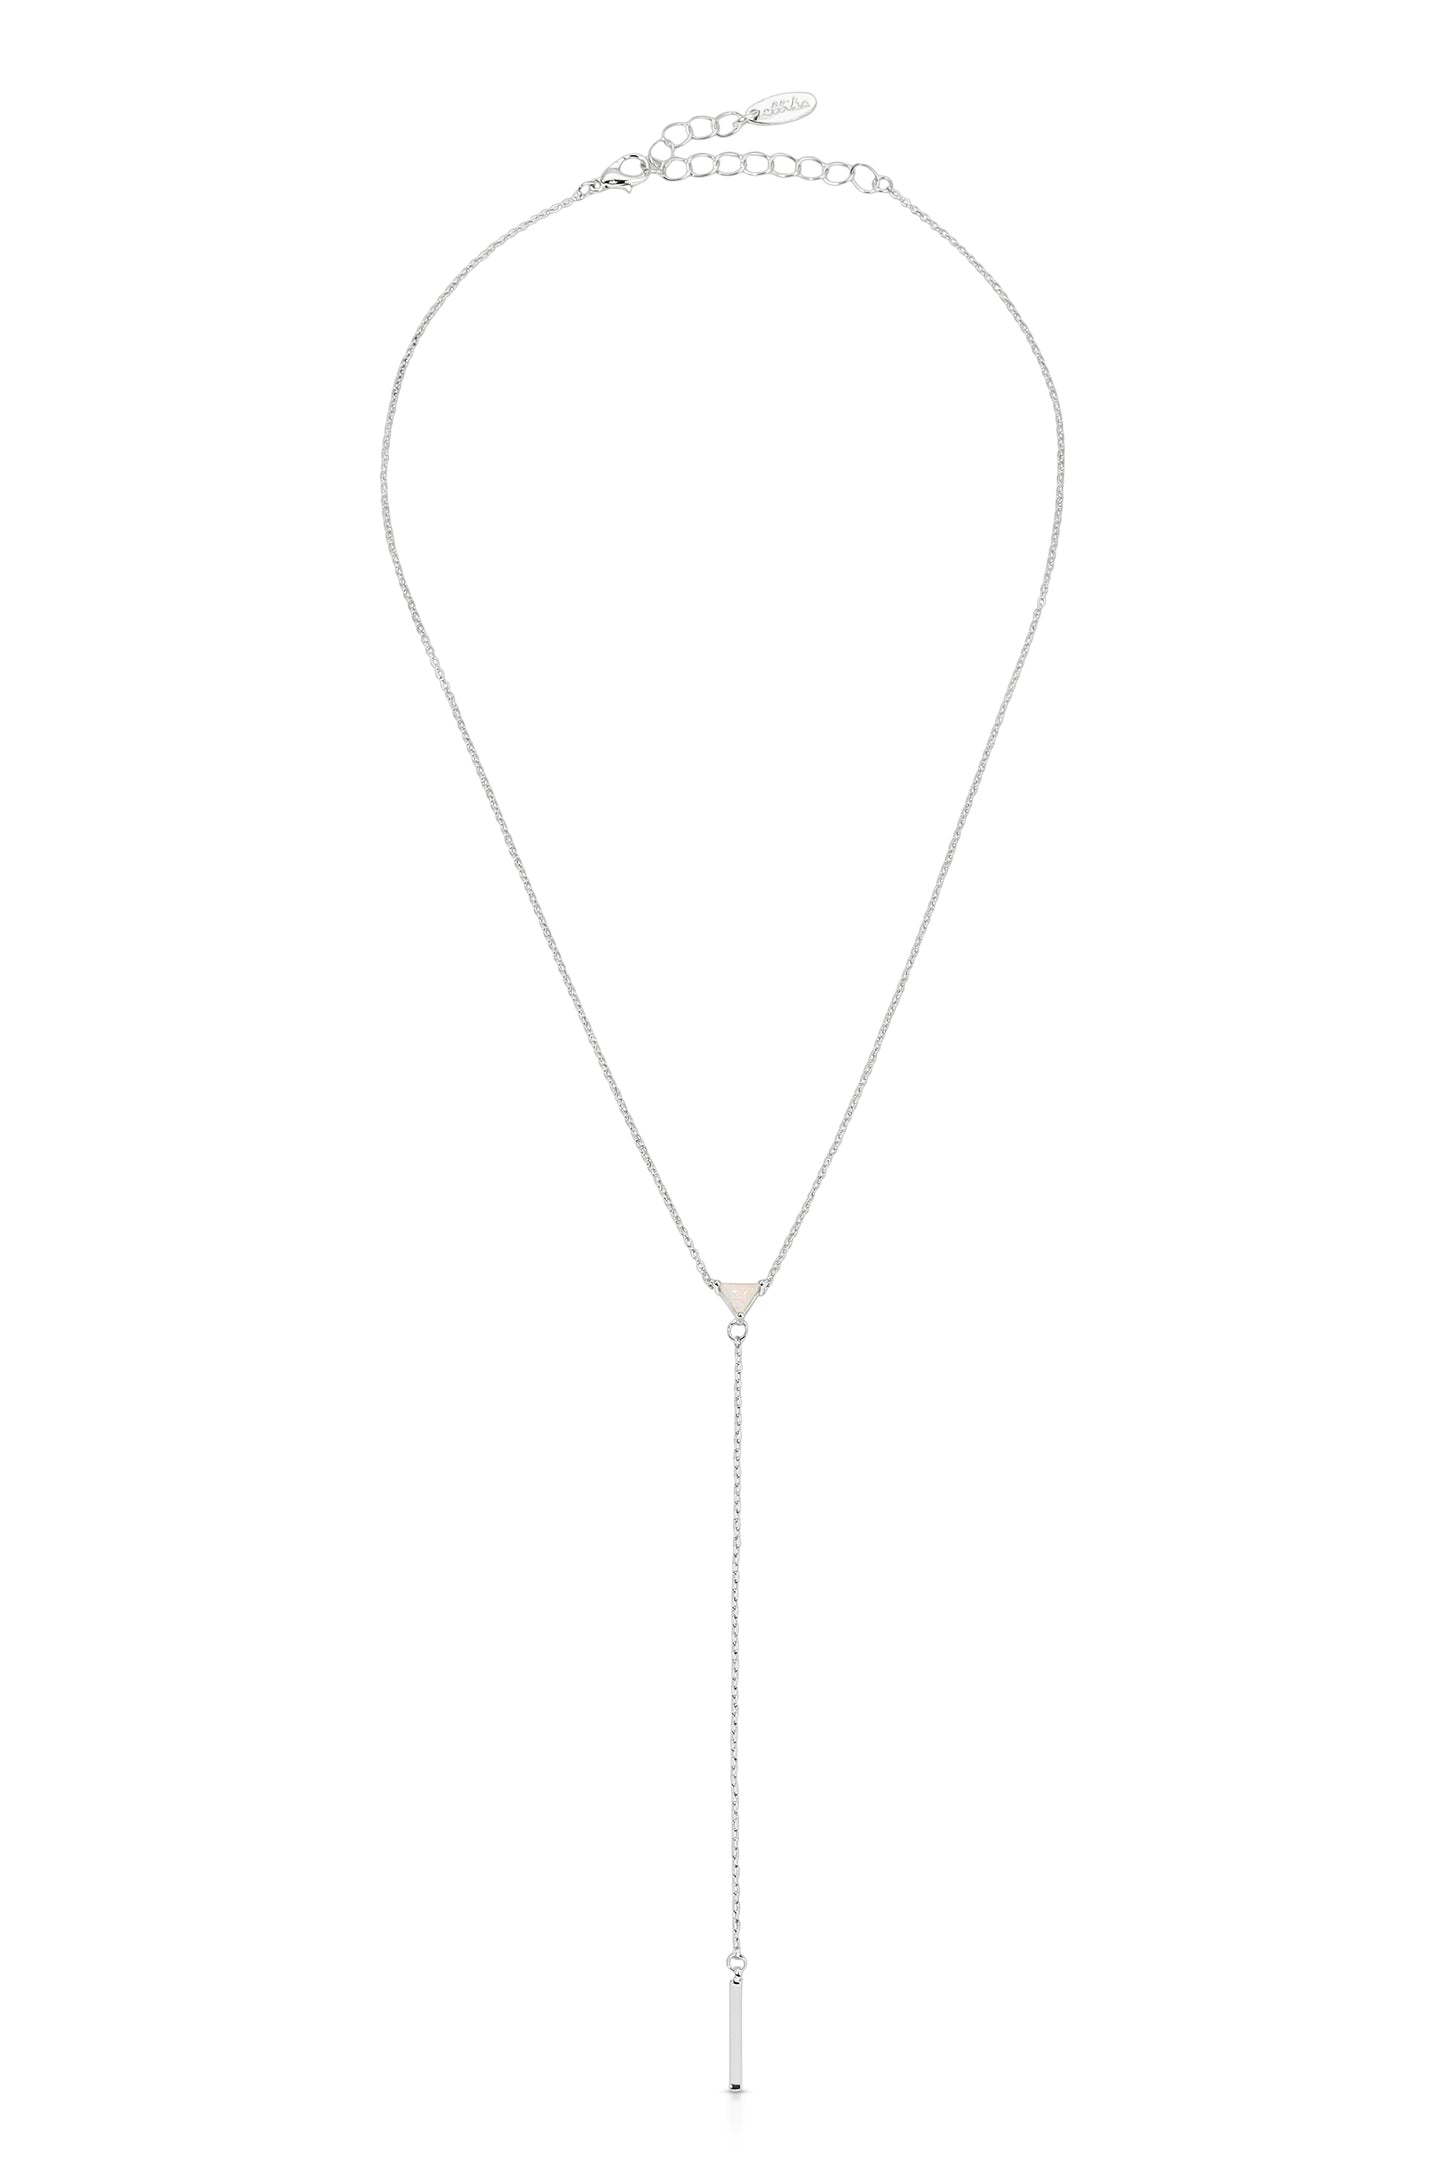 Layered Opal Lariat Necklace Set of 3 in rhodium 4